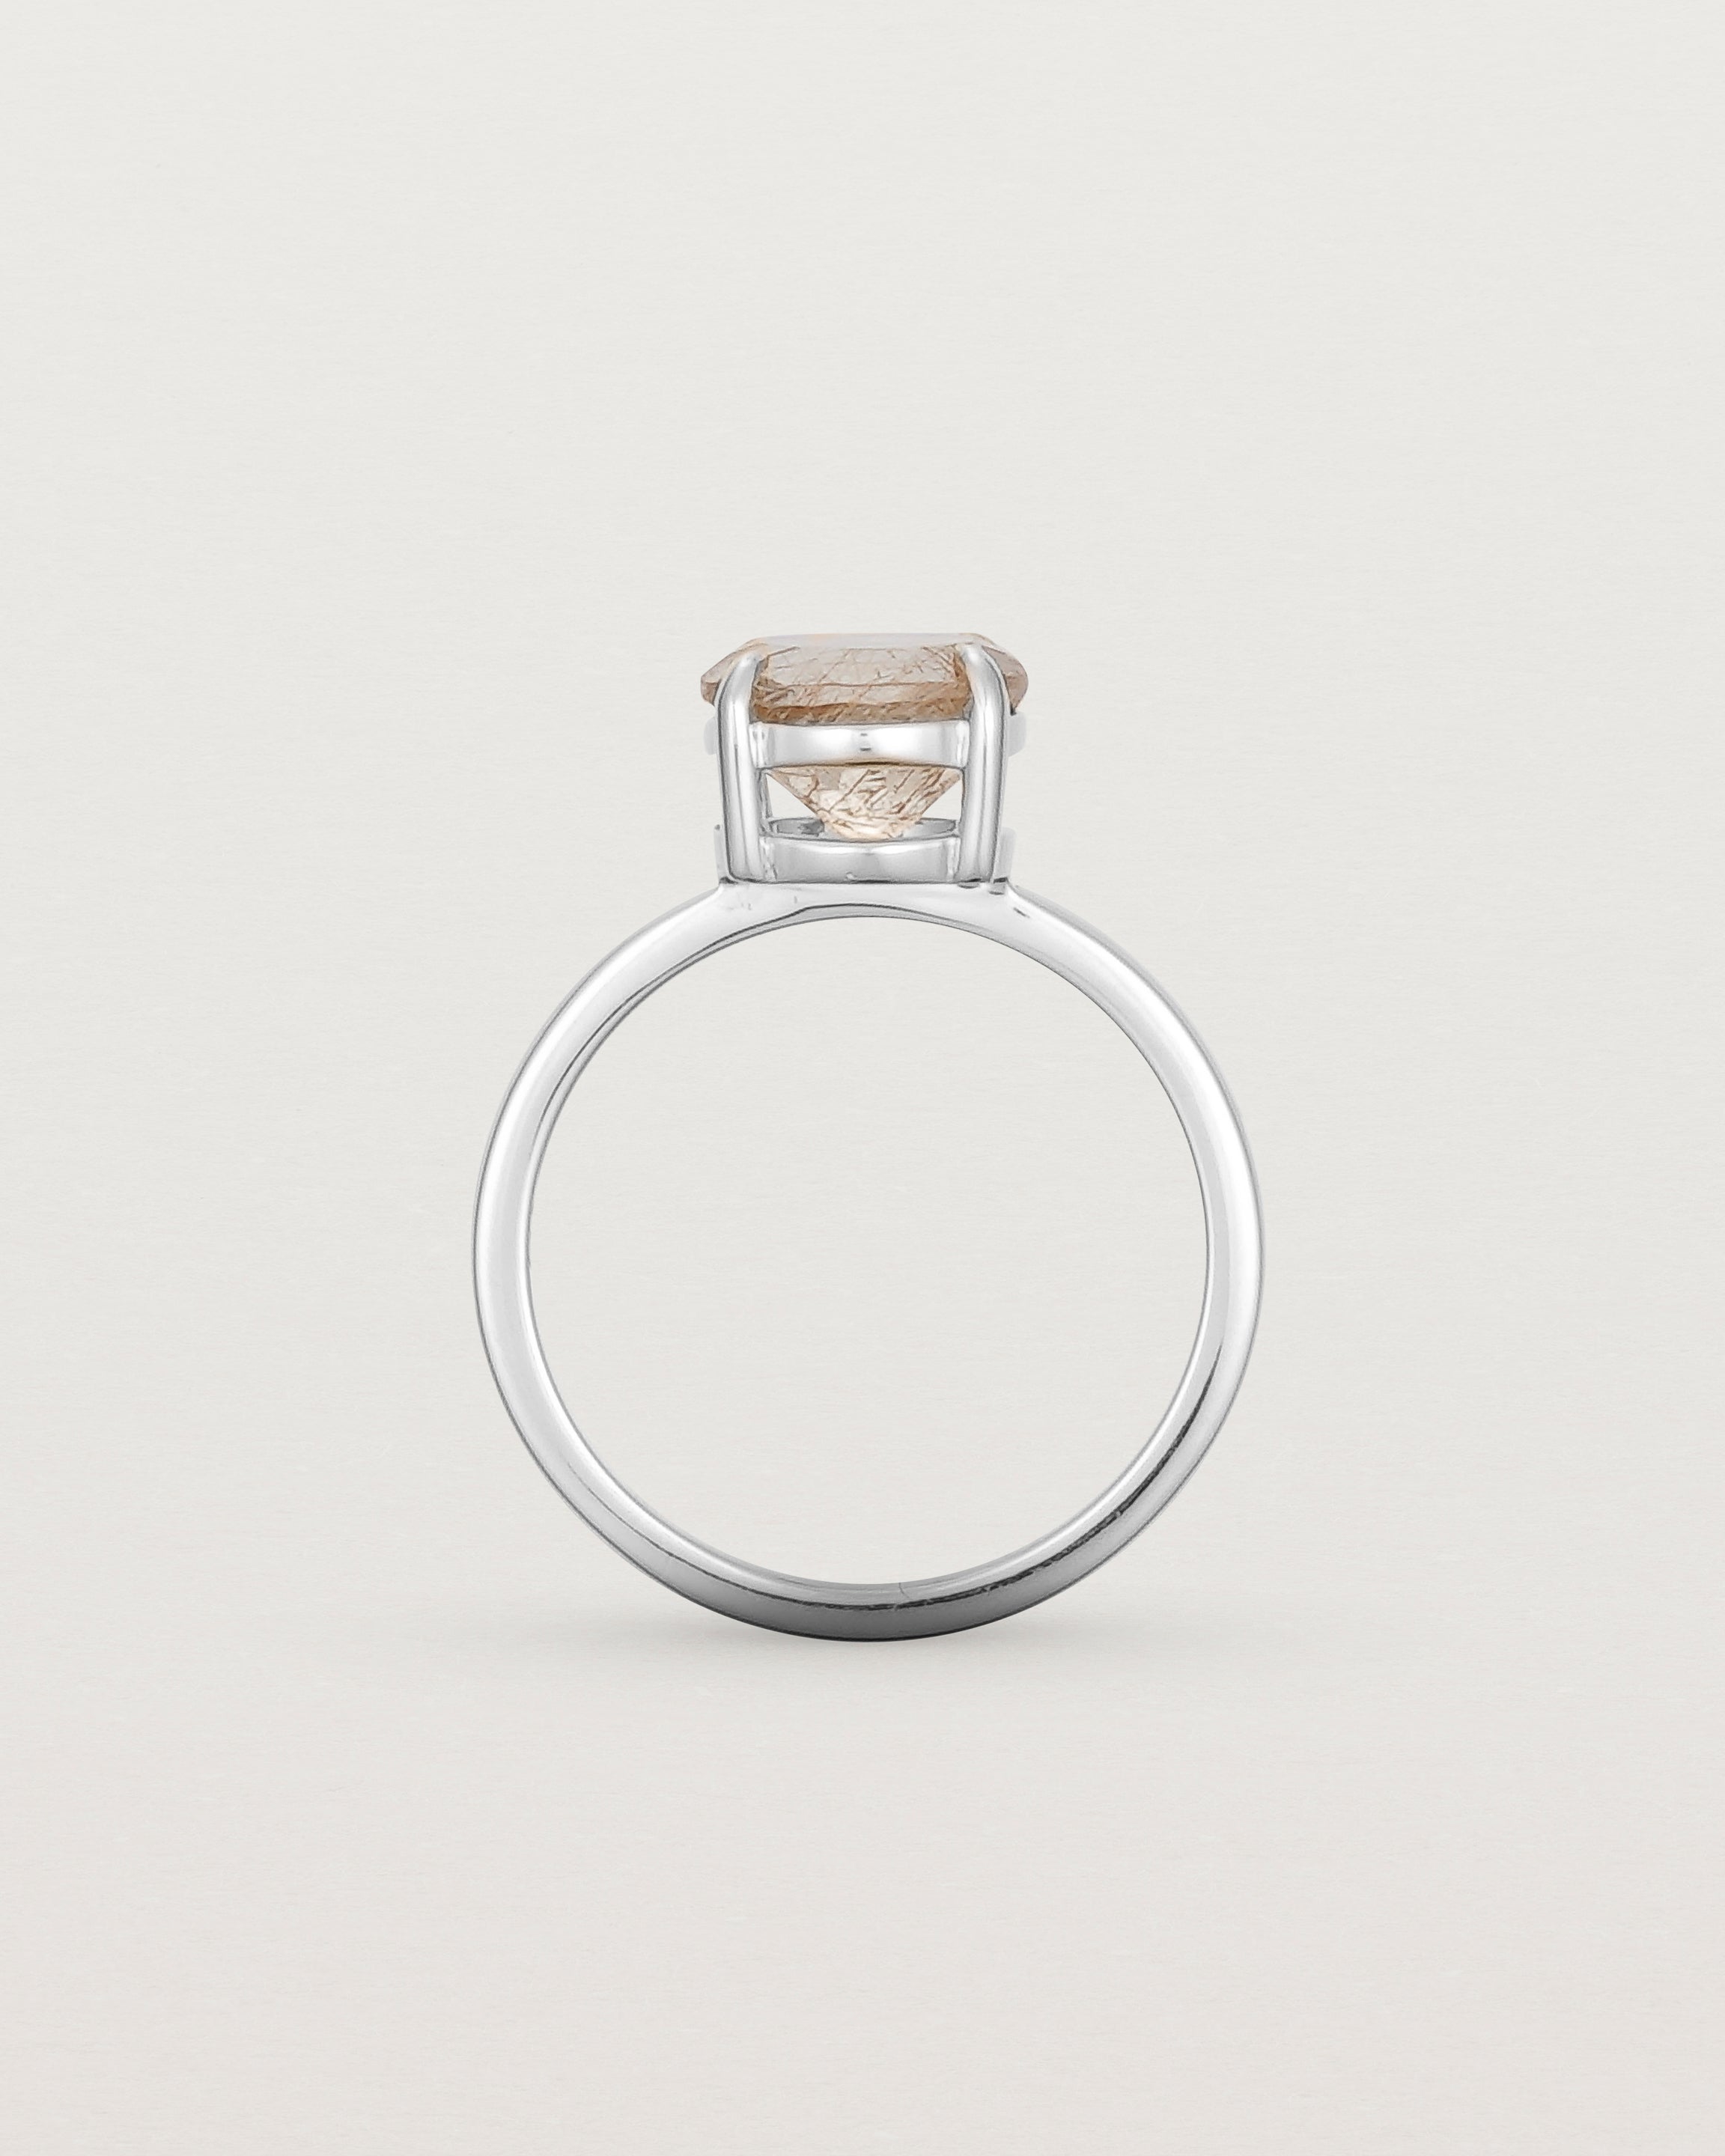 Standing view of the Front view of the Una Round Solitaire | Rutilated Quartz | White Gold.